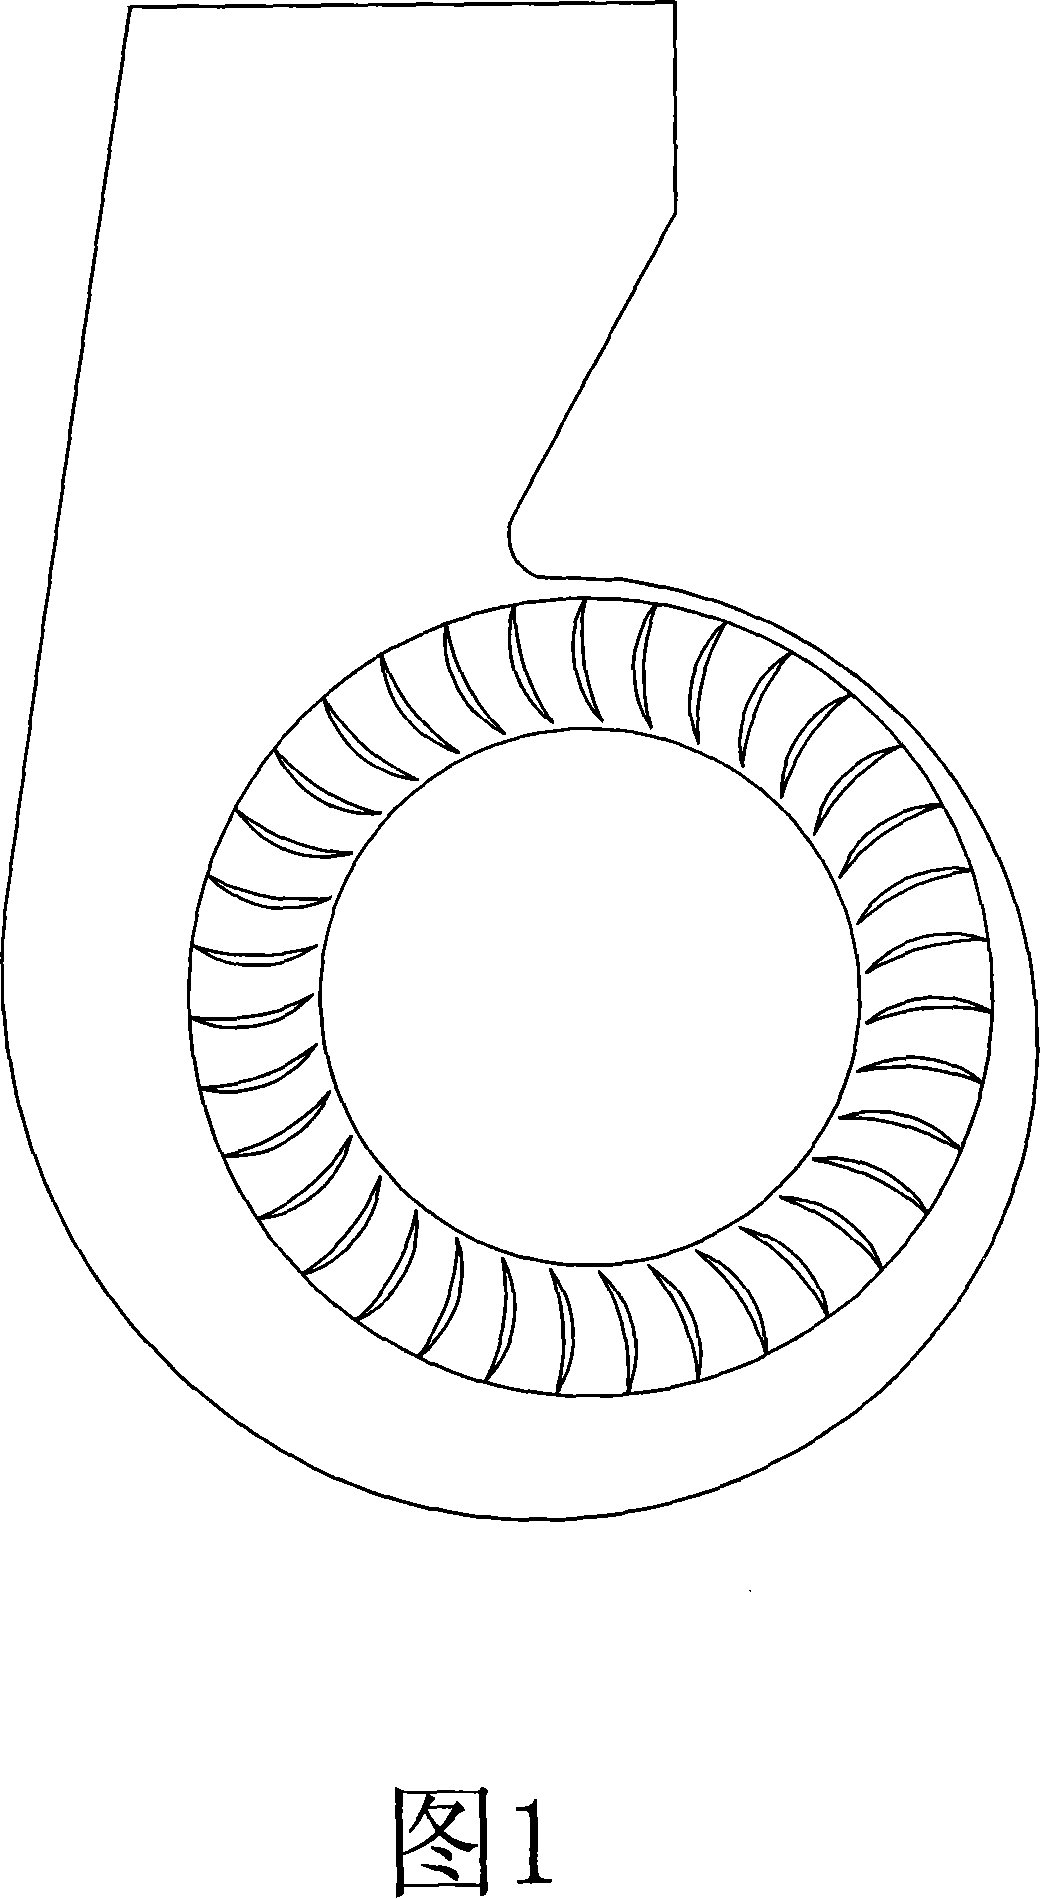 Centrifugal fan and aeration device with indoor air purifying function